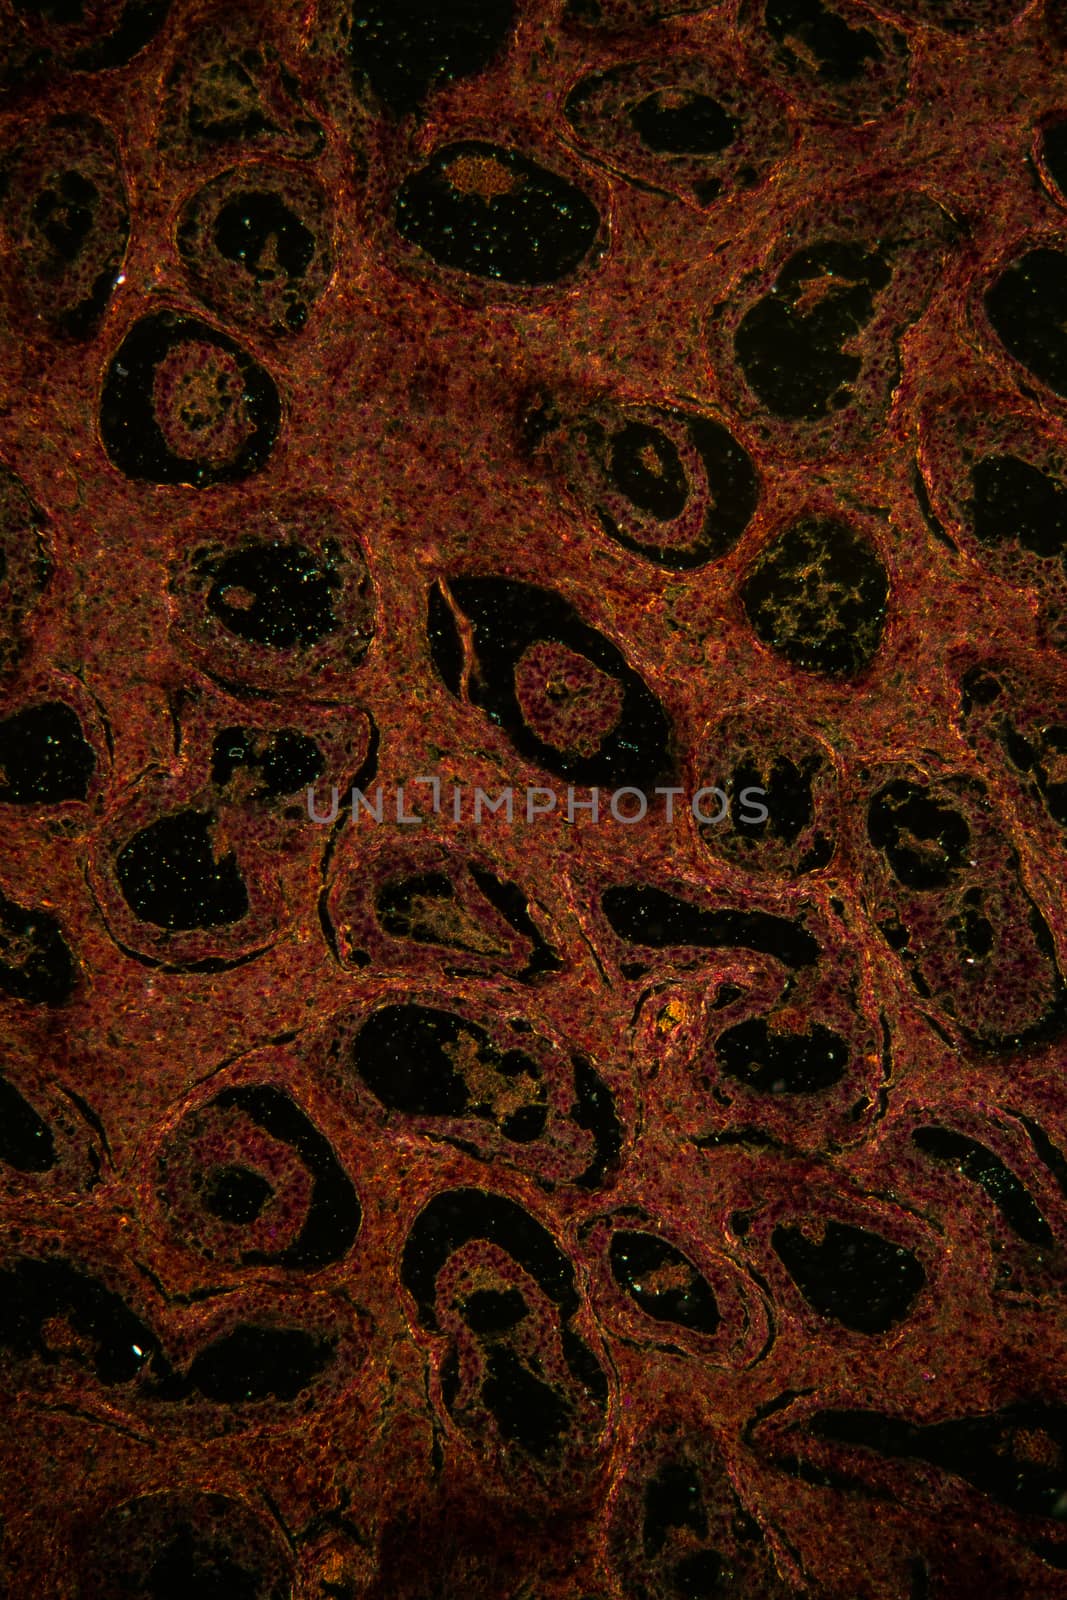 Inguinal testicle tissue under the microscope 100x